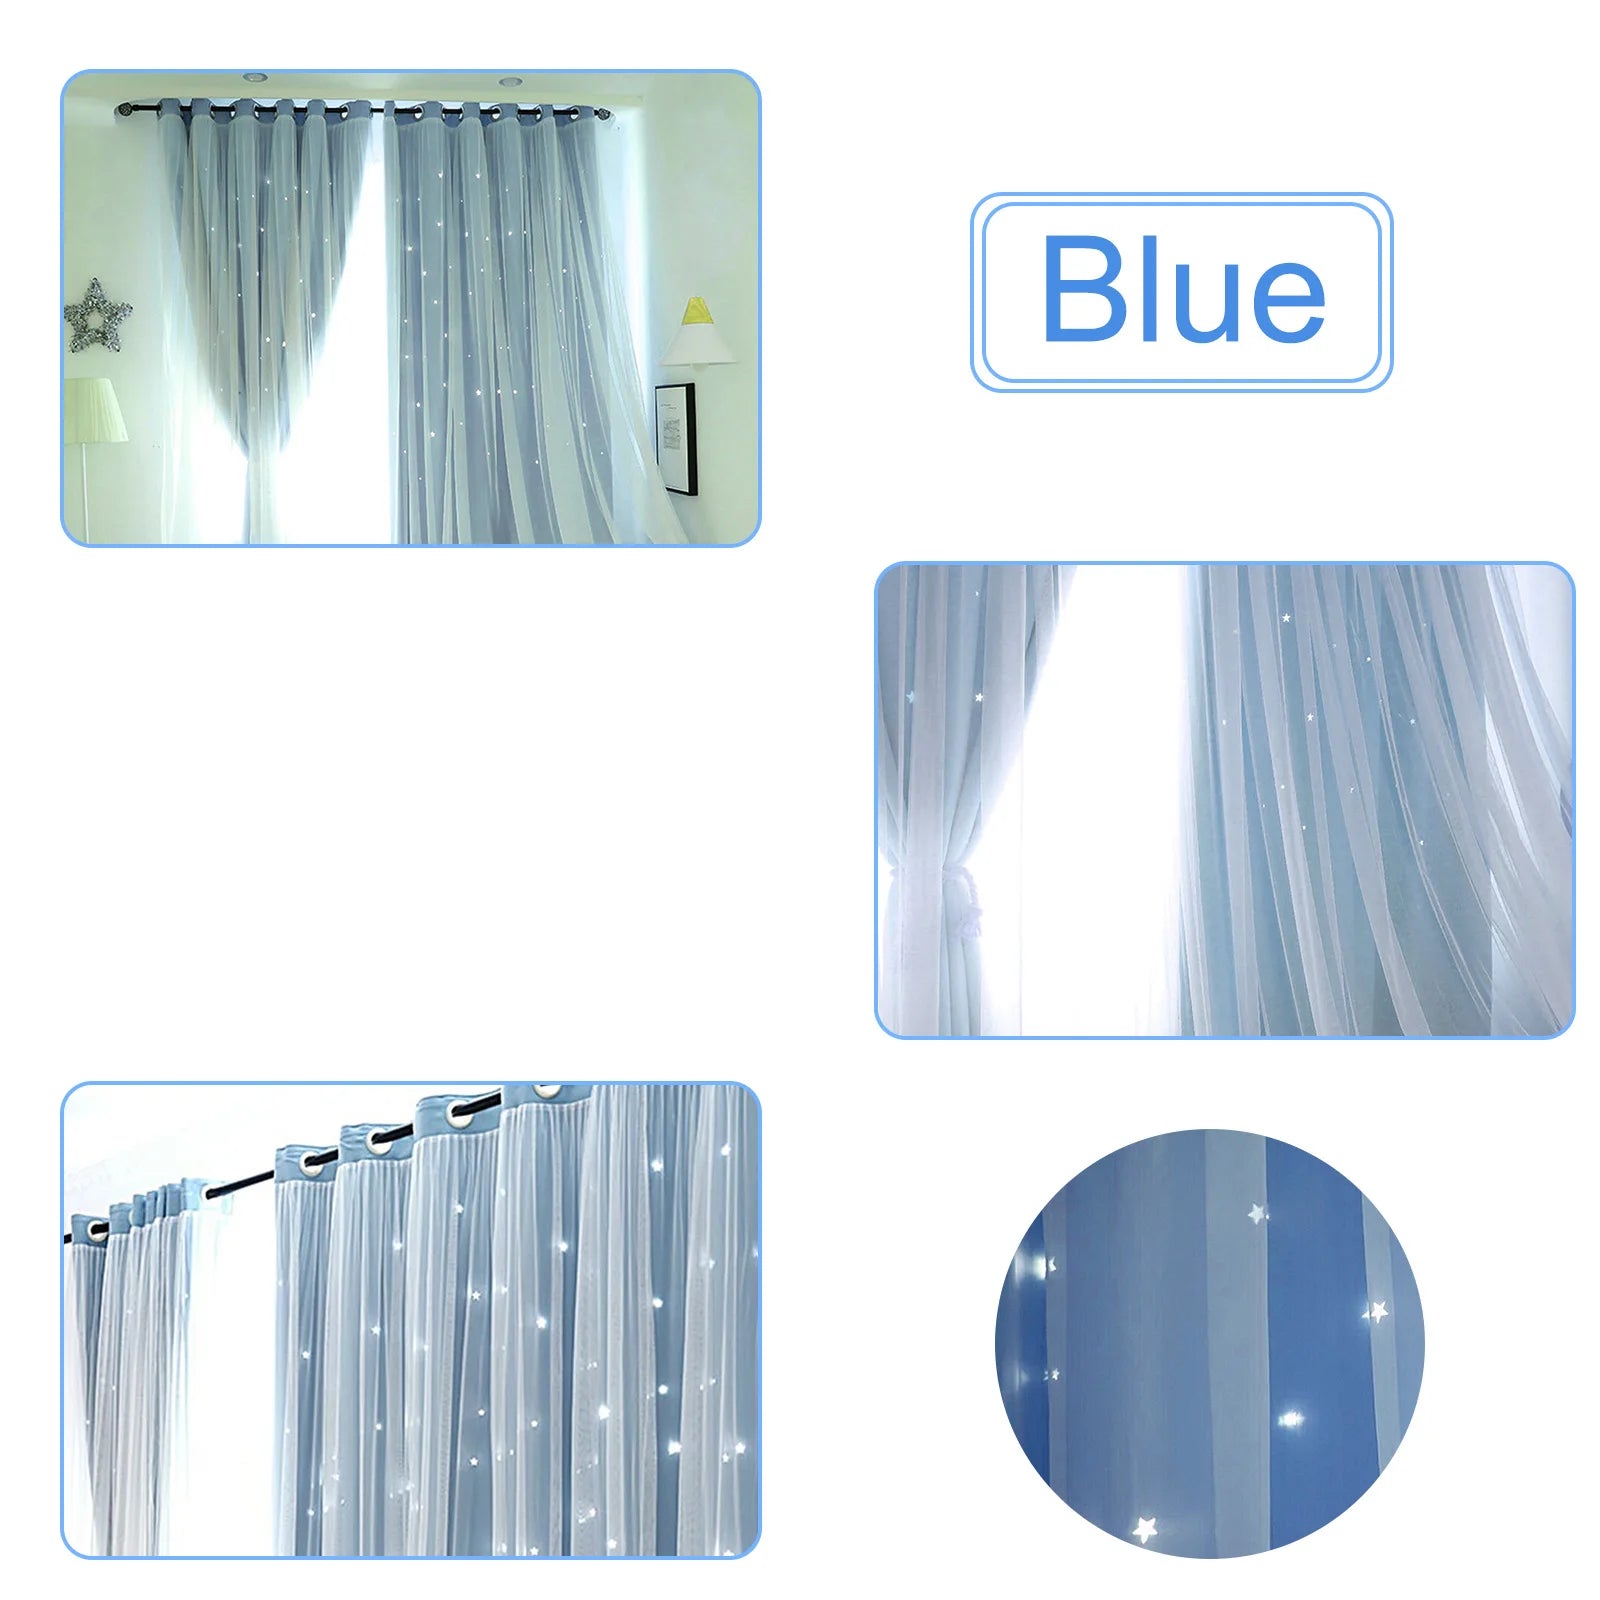 Tulle Blackout Bedroom Curtains